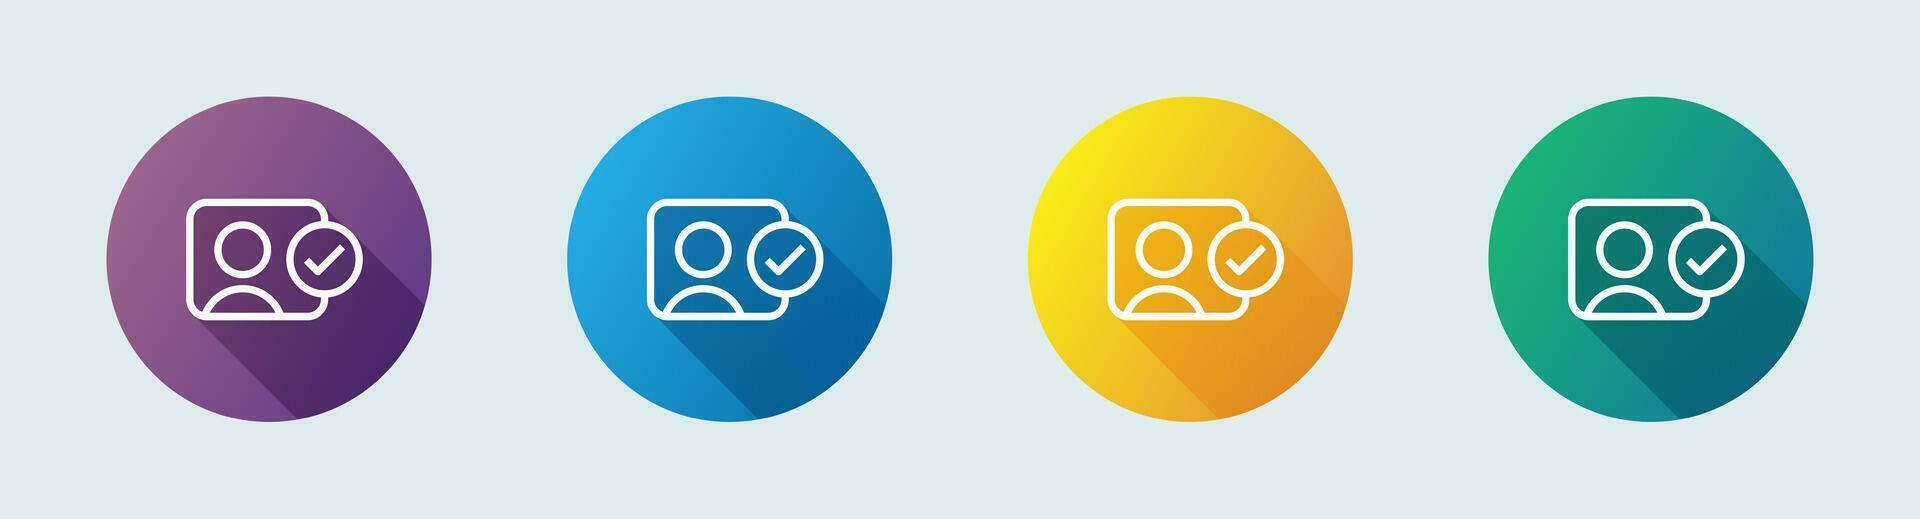 User line icon in flat design style. Profile signs vector illustration.